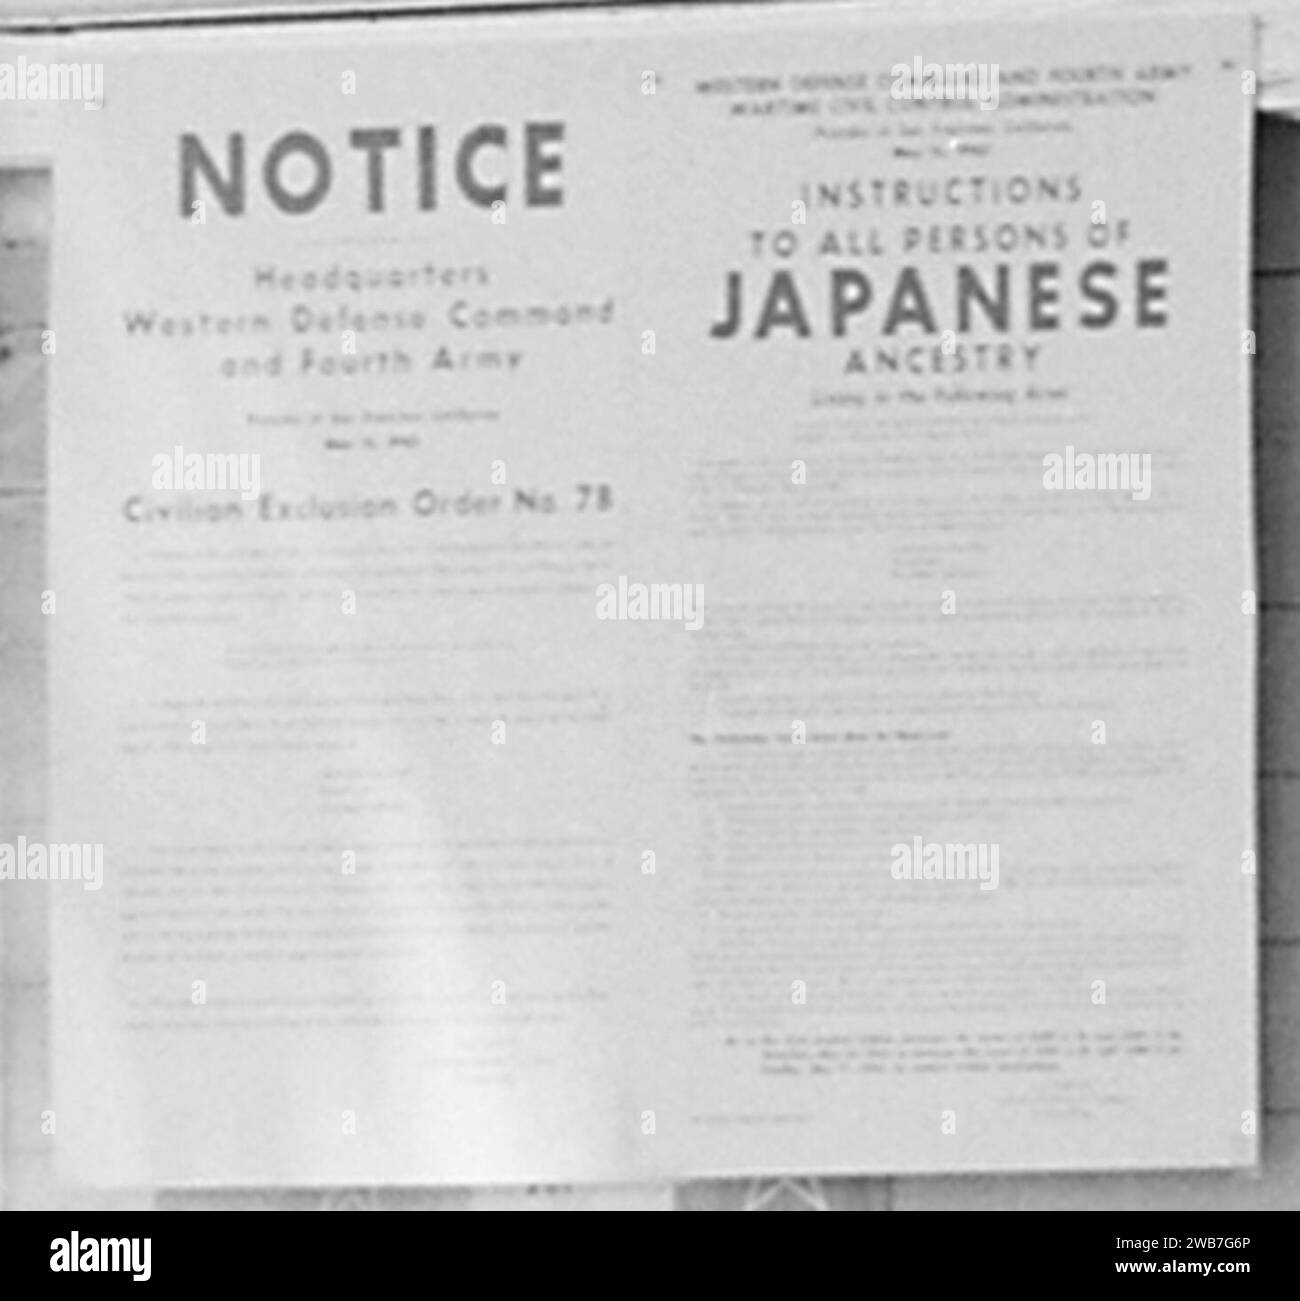 ''NOTICE Headquarters Western Defense Command and Fourth Army Civilian Exclusion Order No. 78'' detail, Woodland, California. Entrance to American Legion Hall, now used by Wartime Civil Control Administr . . . - Stock Photo